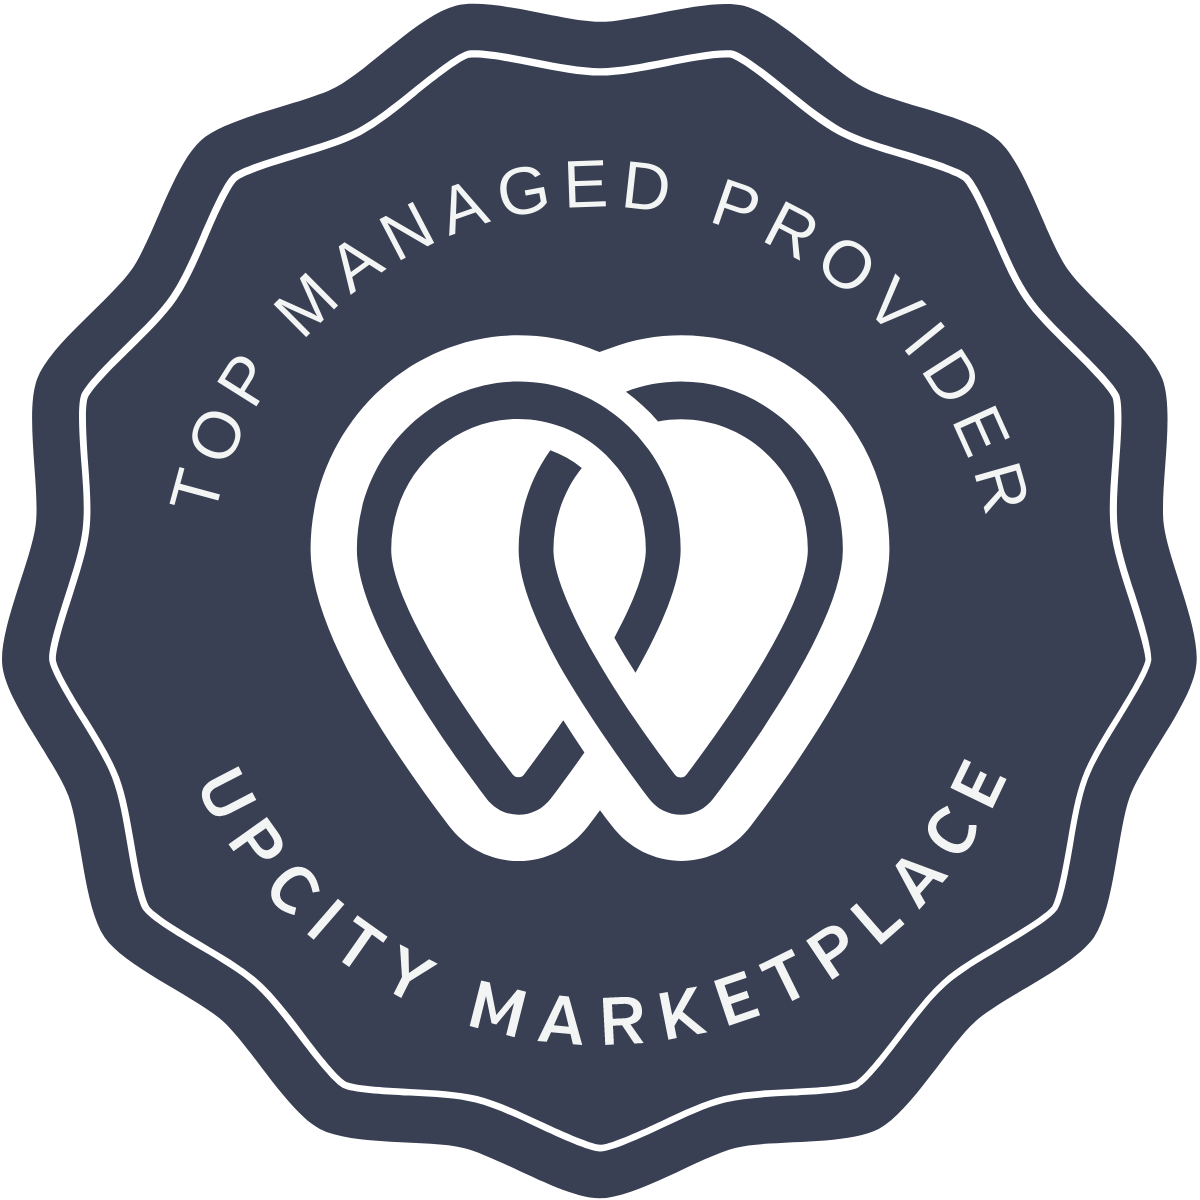 TOP MANAGED PROVIDER